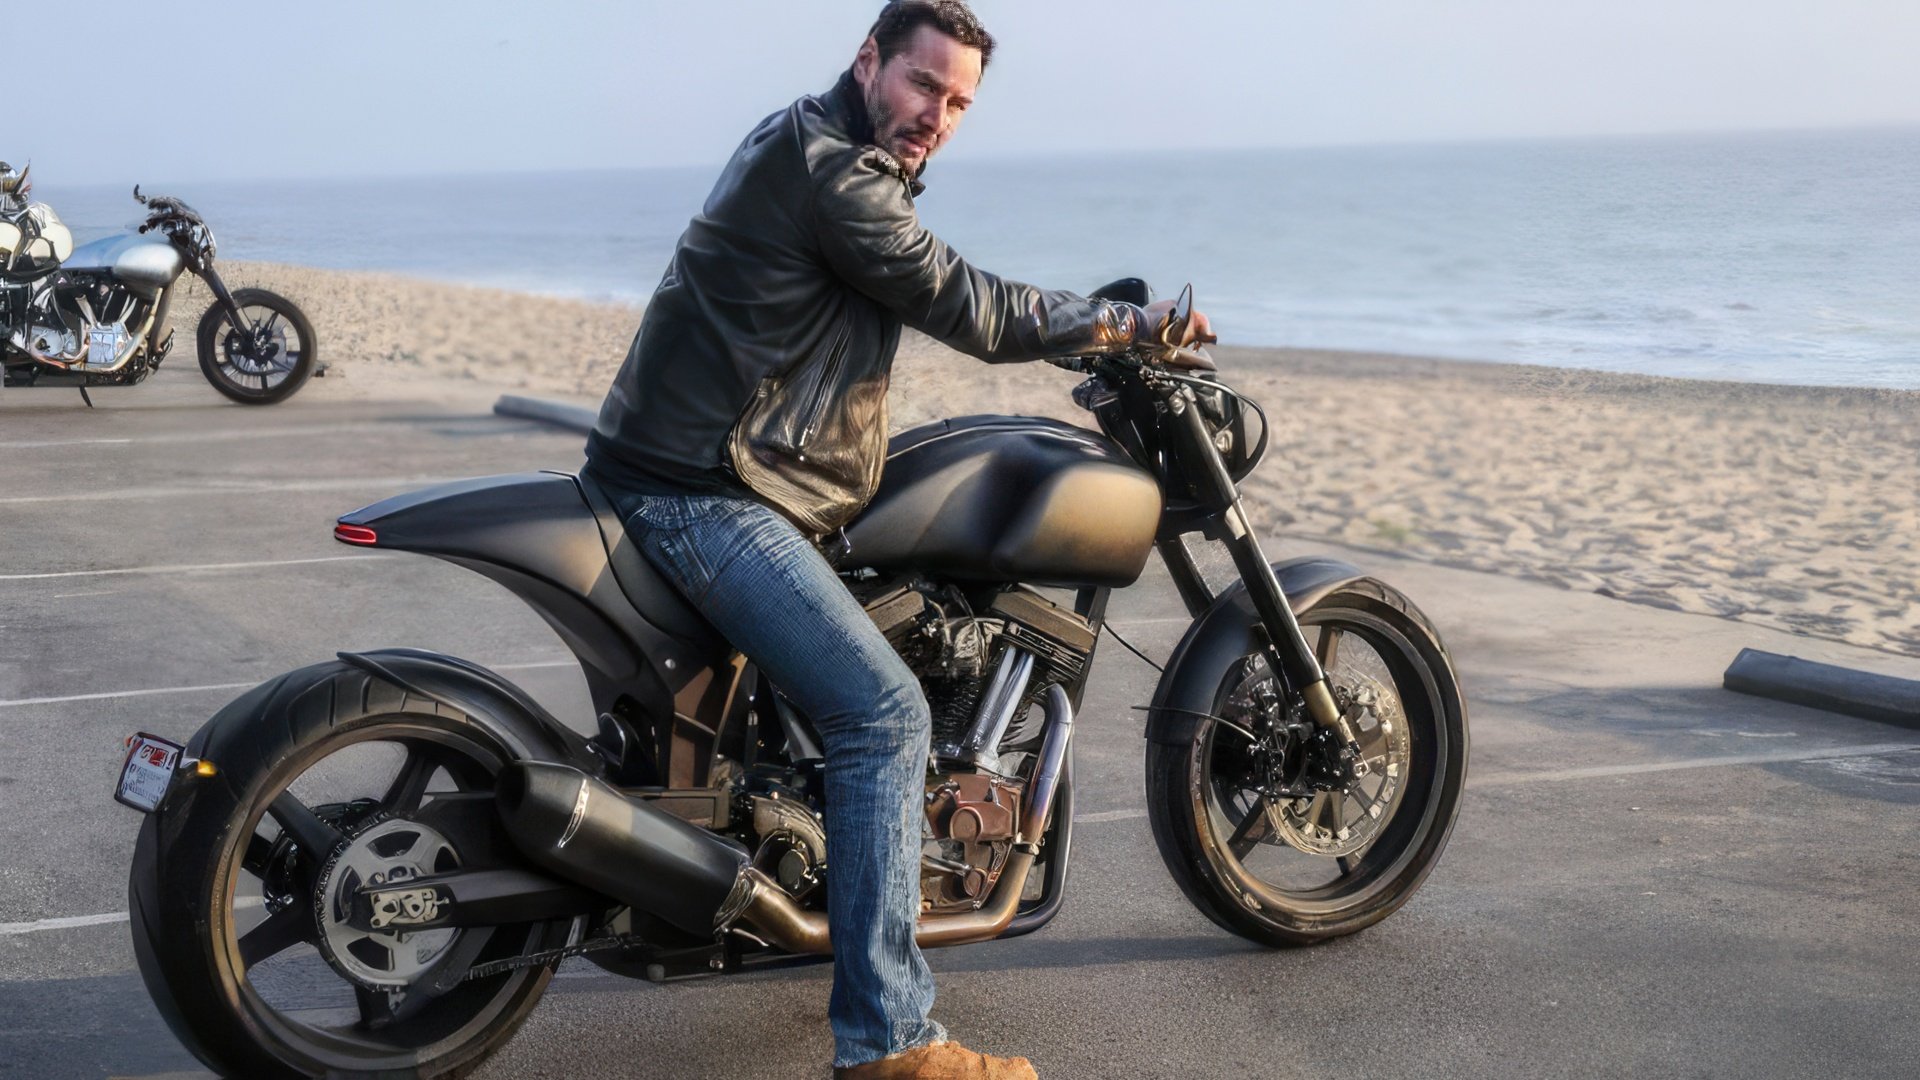 Keanu Reeves loves motorcycles and fast driving